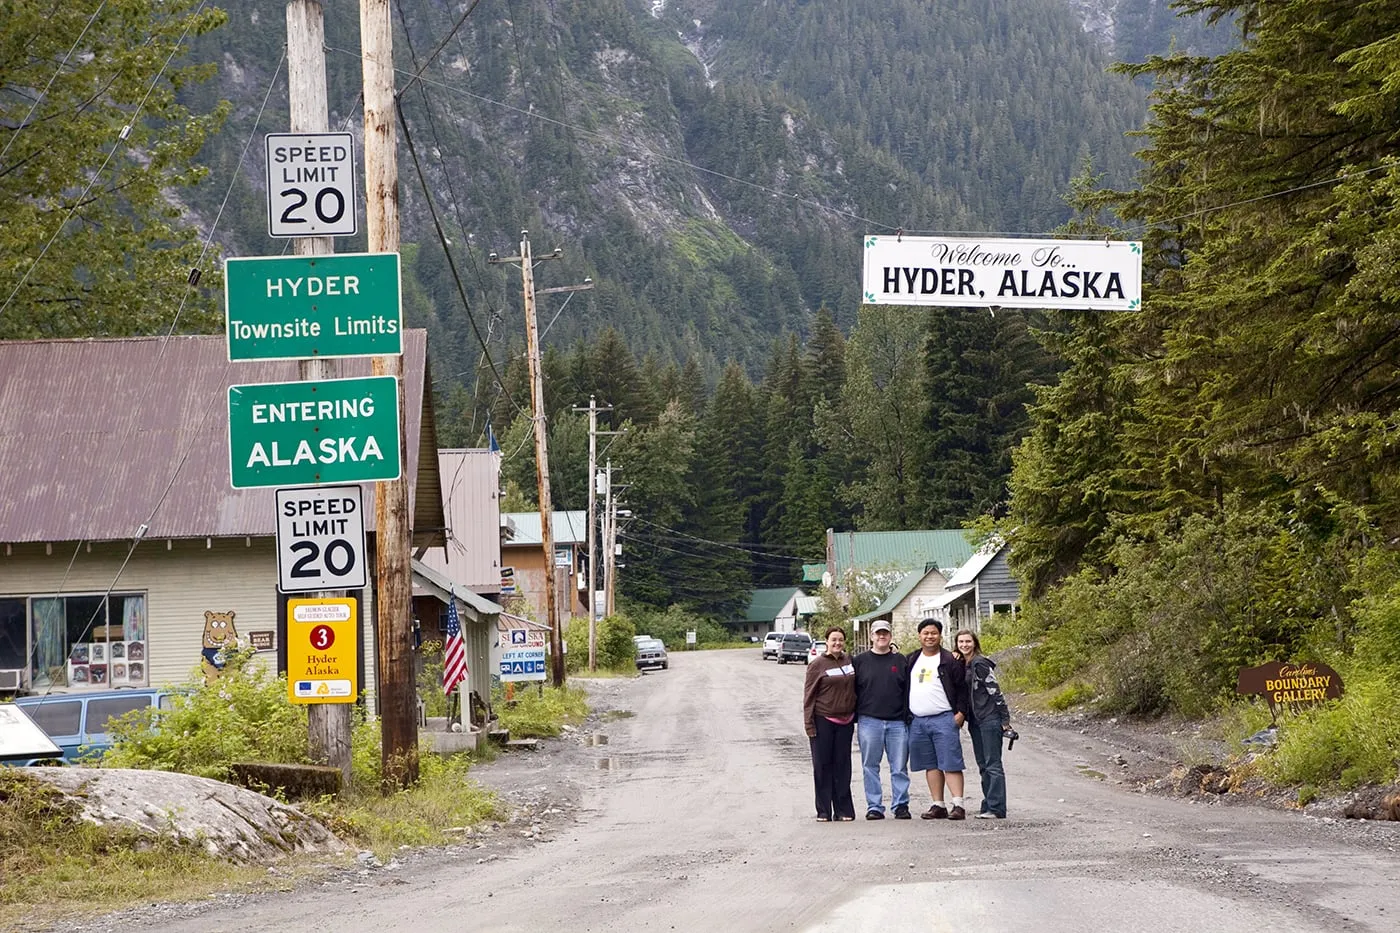 Road trippers in front of the Welcome to Hyder, Alaska sign.